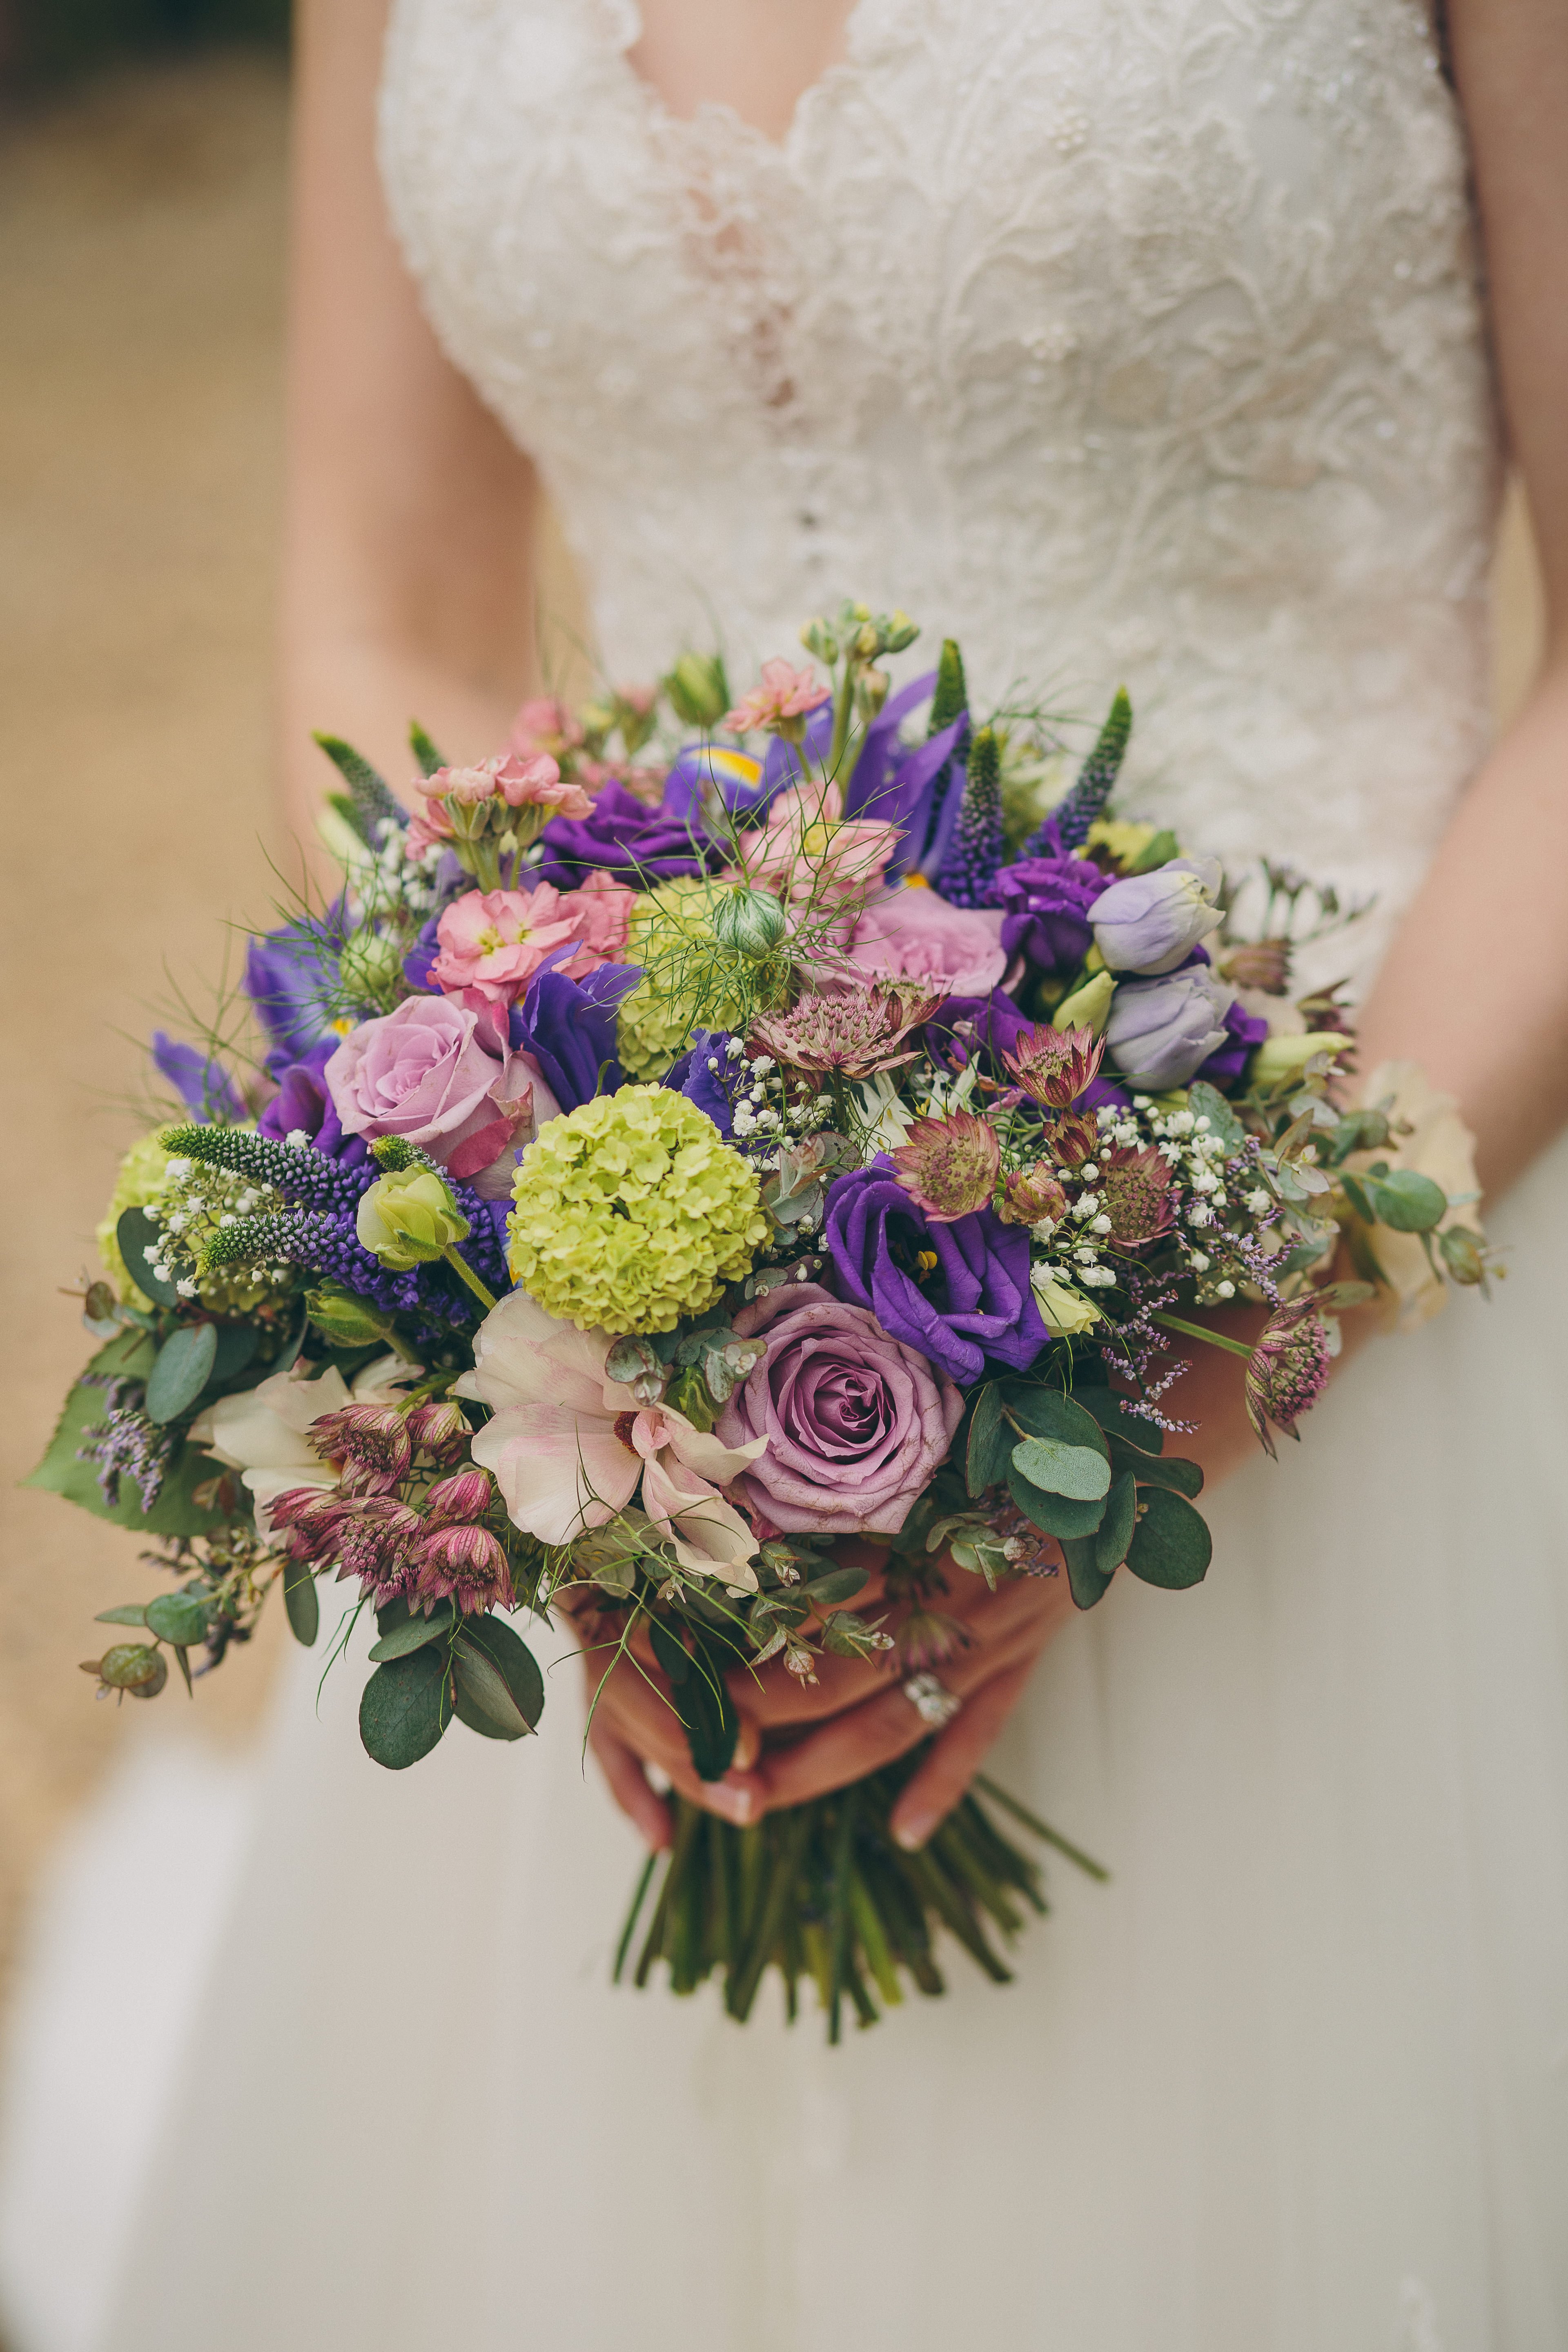 WEDDING FLOWER WORKSHOPS 1:1 or group classes with Jenni Wren Creative